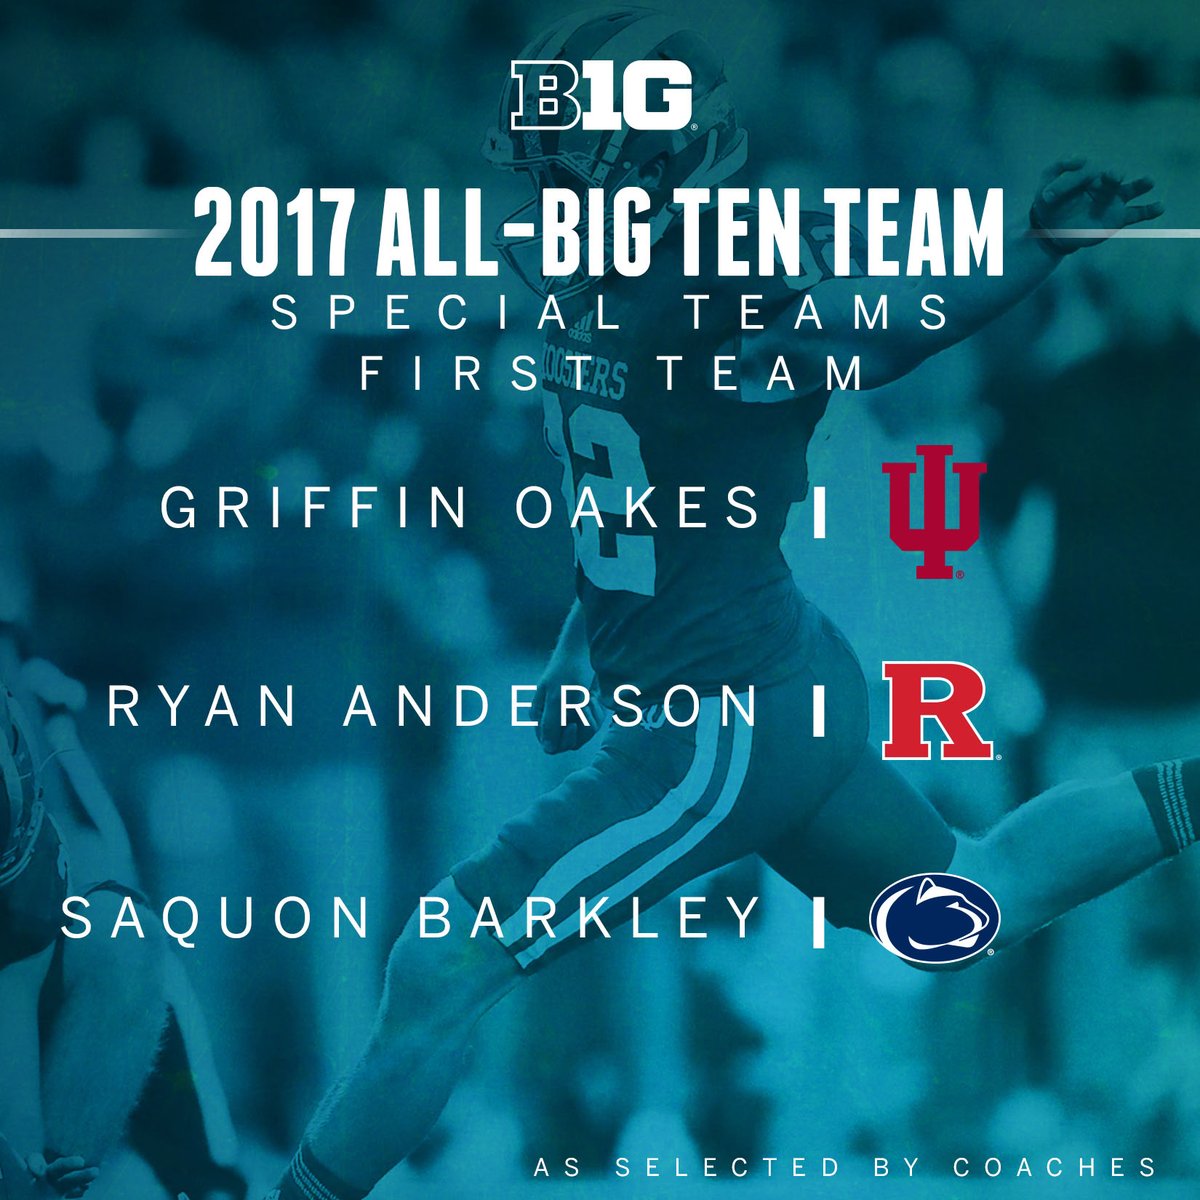 All-Big Ten Special Teams First Team, as selected by coaches